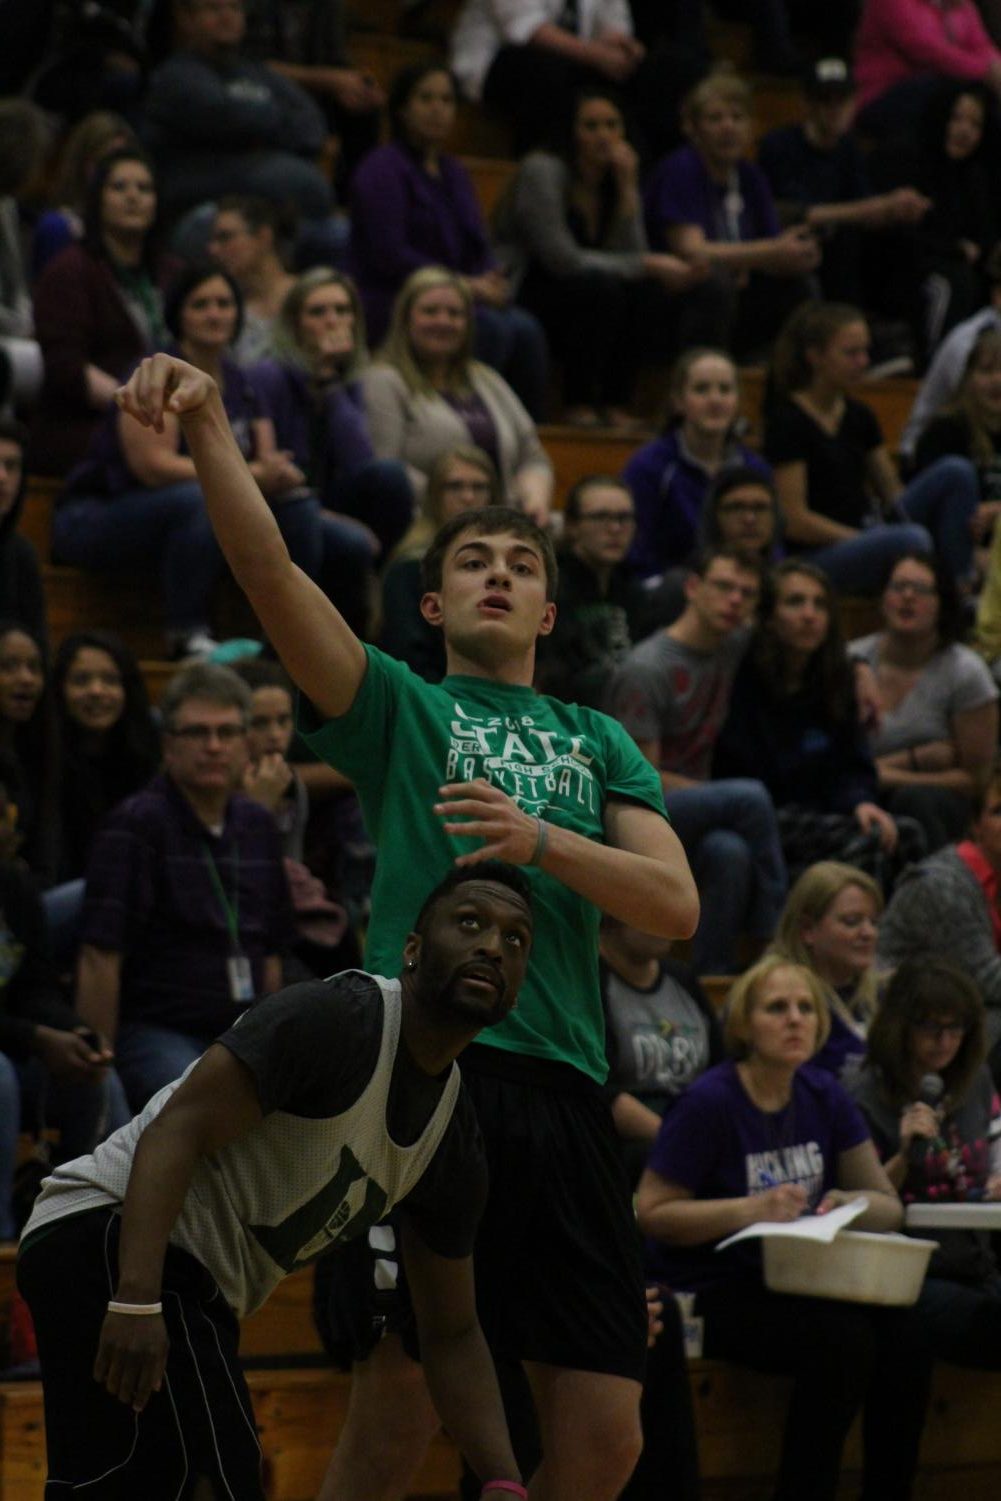 Seniors+vs.+staff+basketball+game+%28Photos+by+Abby+Glanville%29